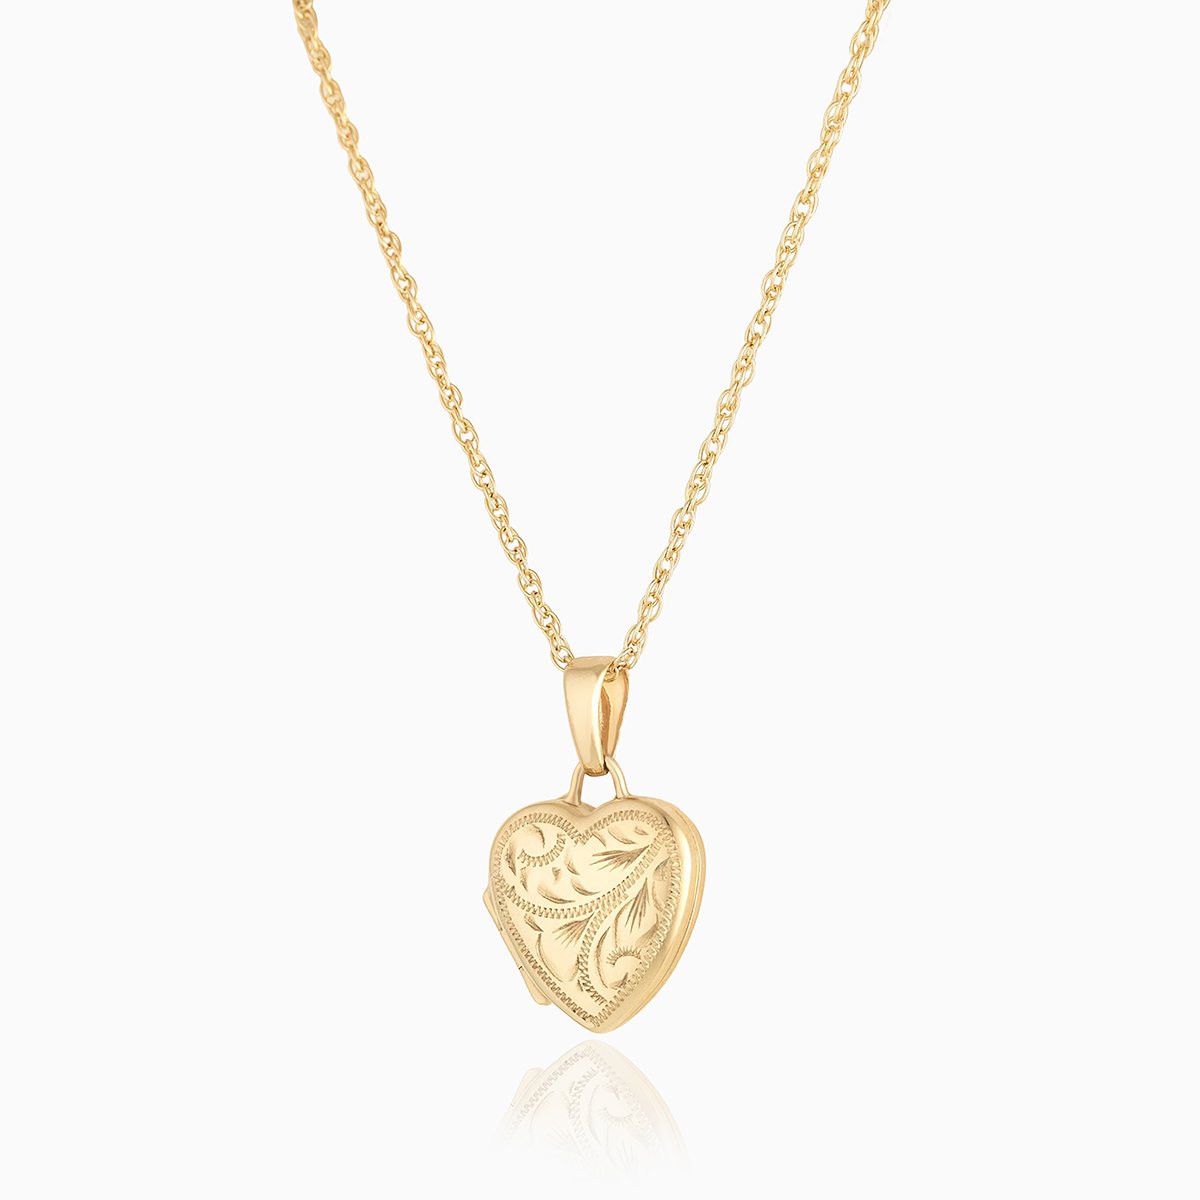 9 ct gold heart shaped locket with all over engraving on a 9 ct gold rope chain